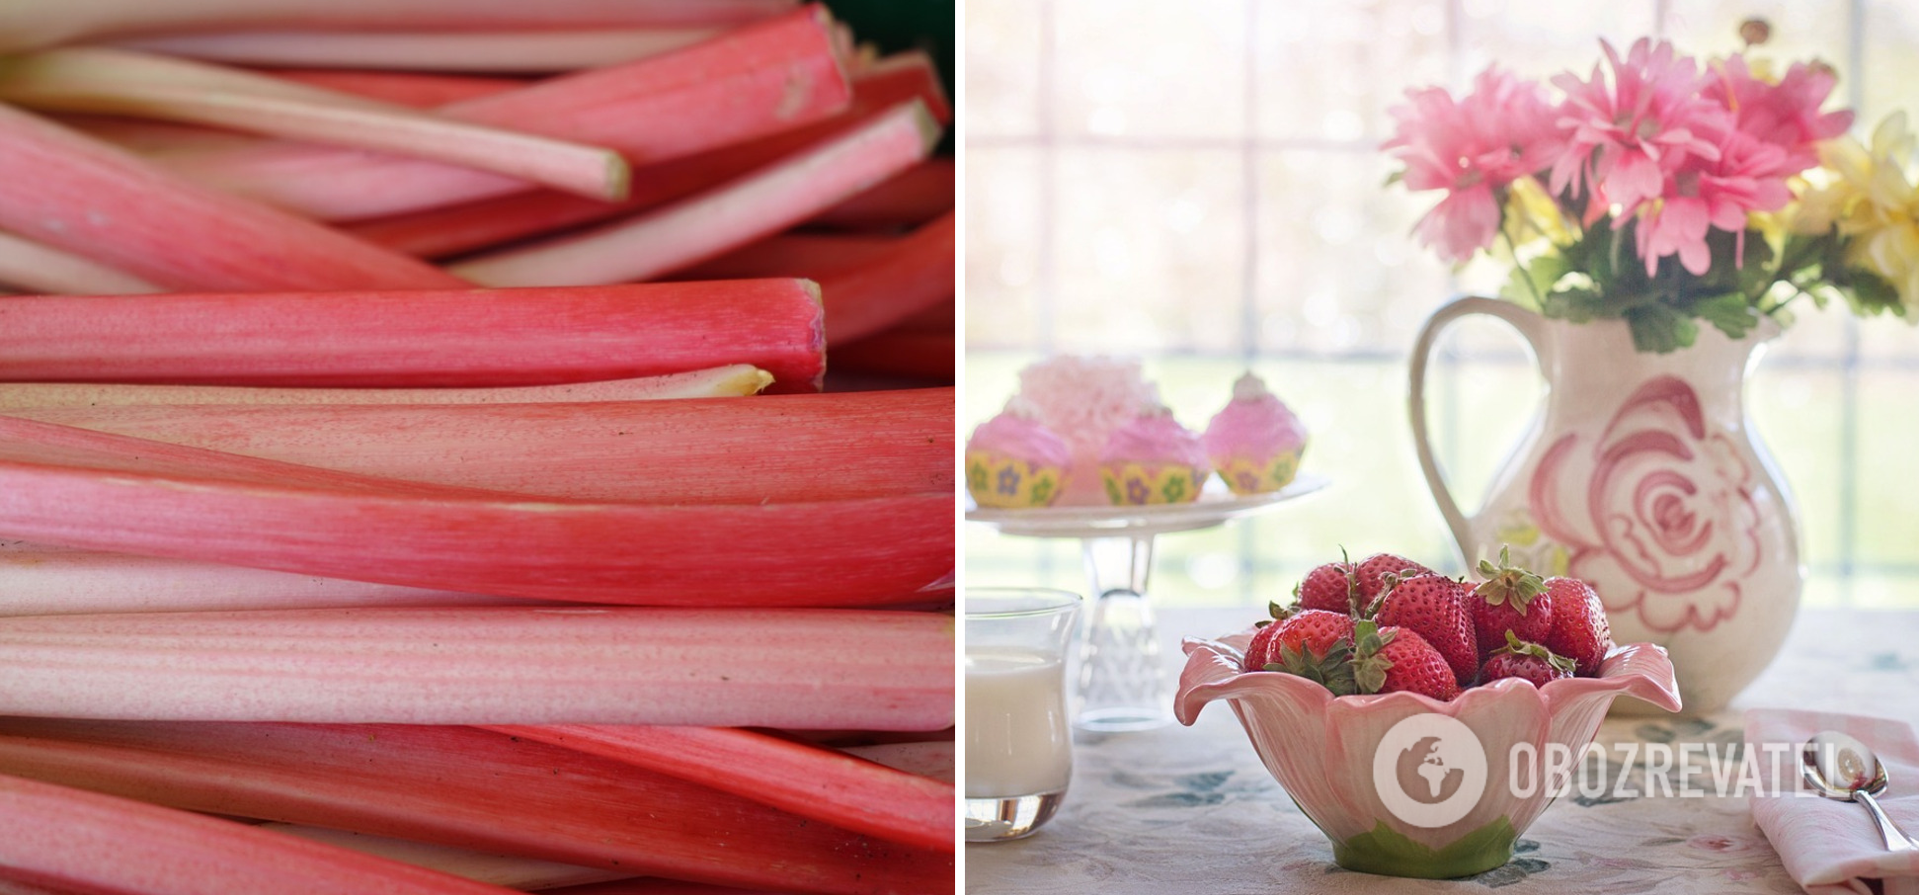 Rhubarb and strawberries for jam